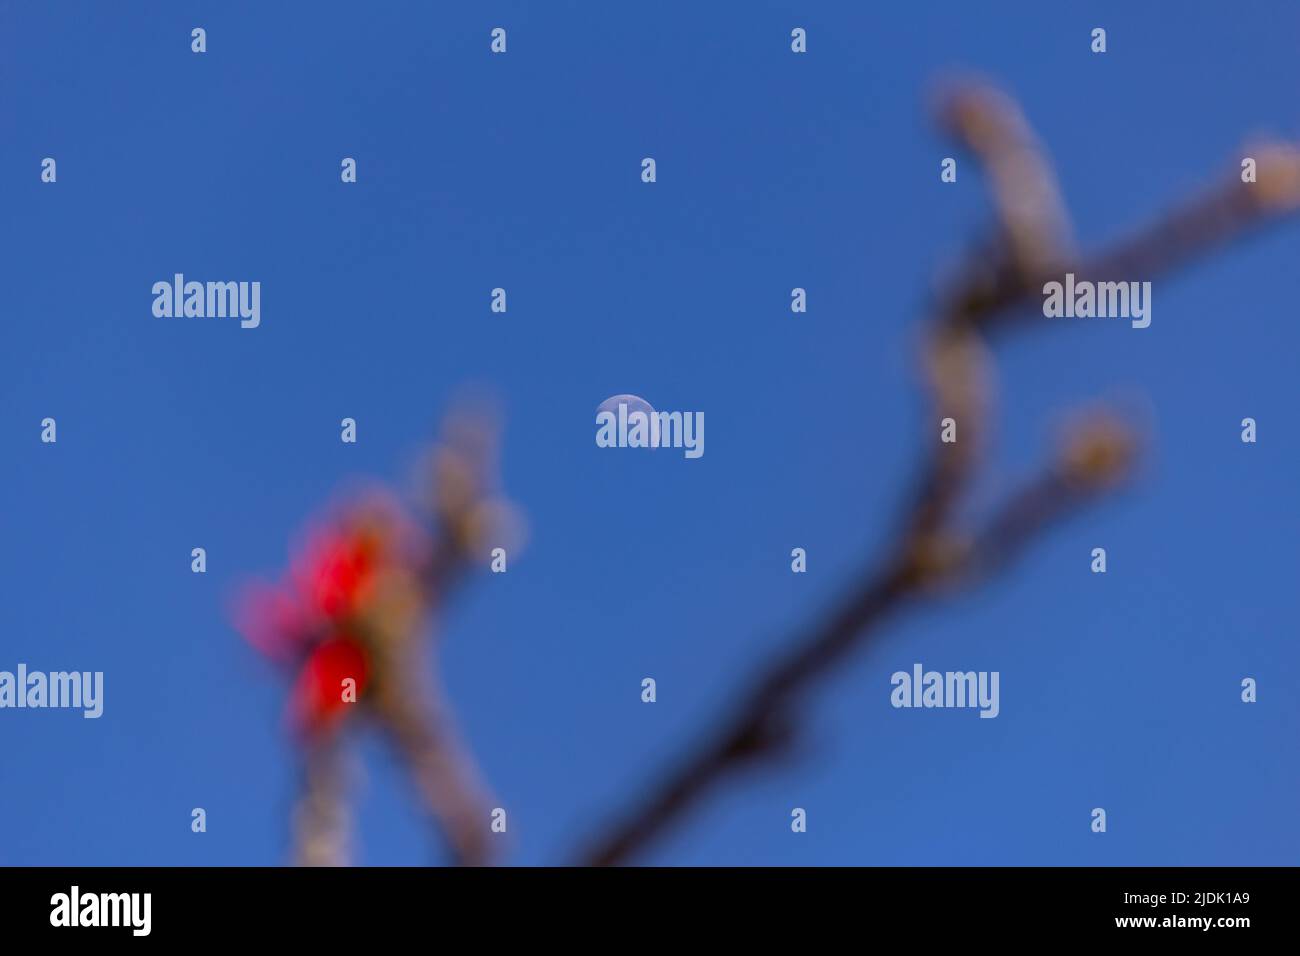 Goiania, Goiás, Brazil – June 19, 2022: The moon in the blue sky during the day, with details of flowering mulungu branches. Erythrina speciosa. Stock Photo